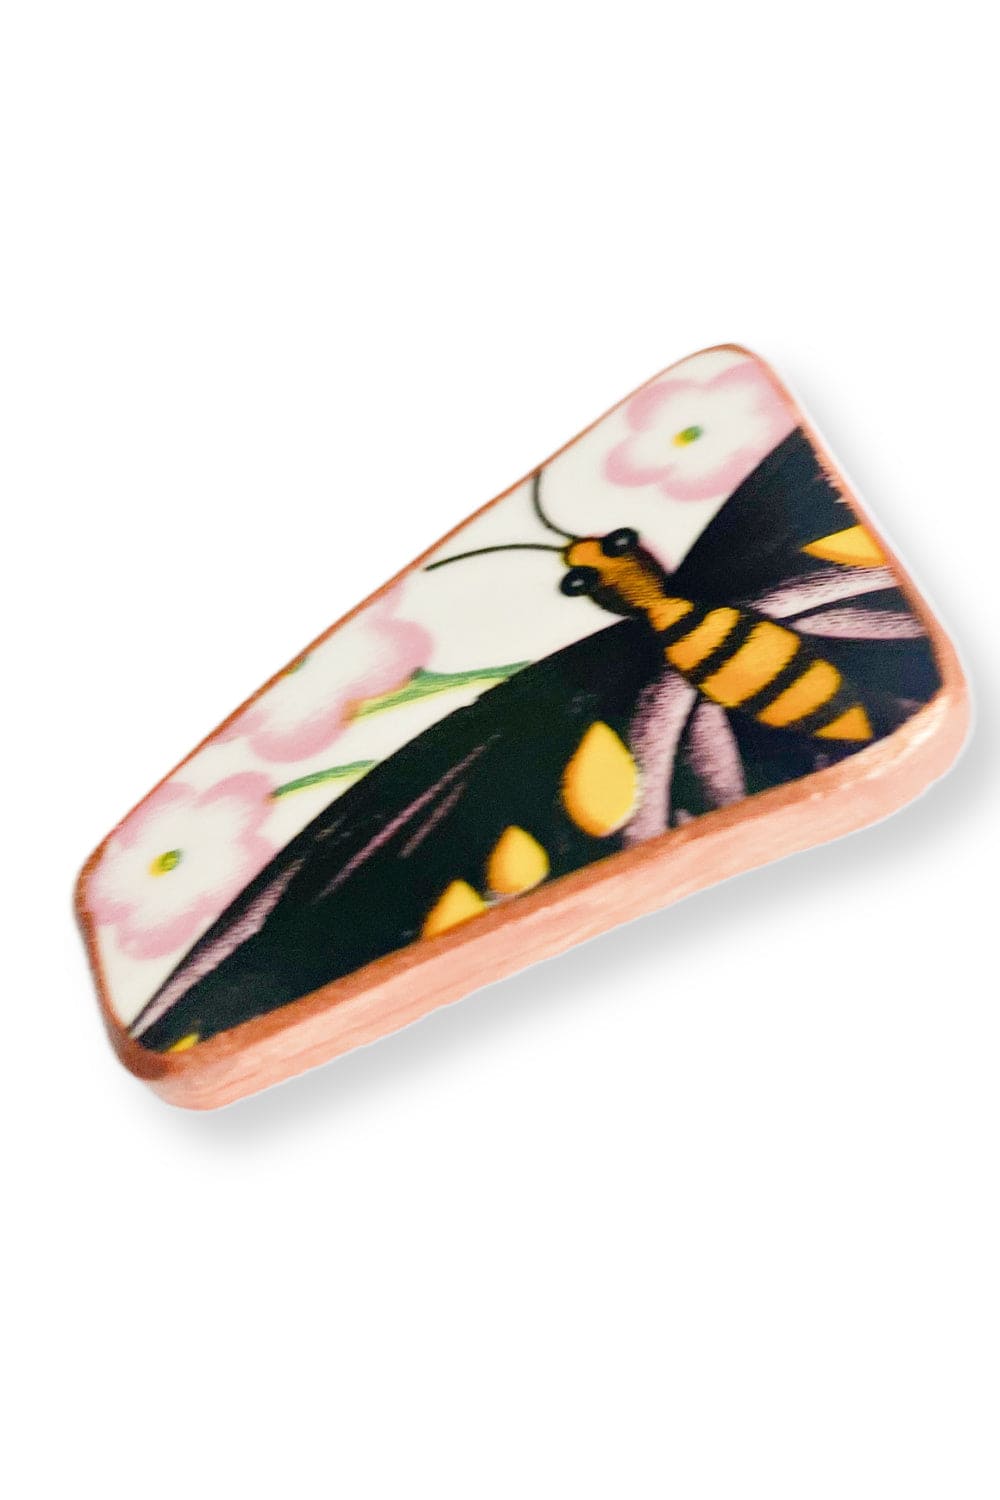 Butterfly china plate brooch.